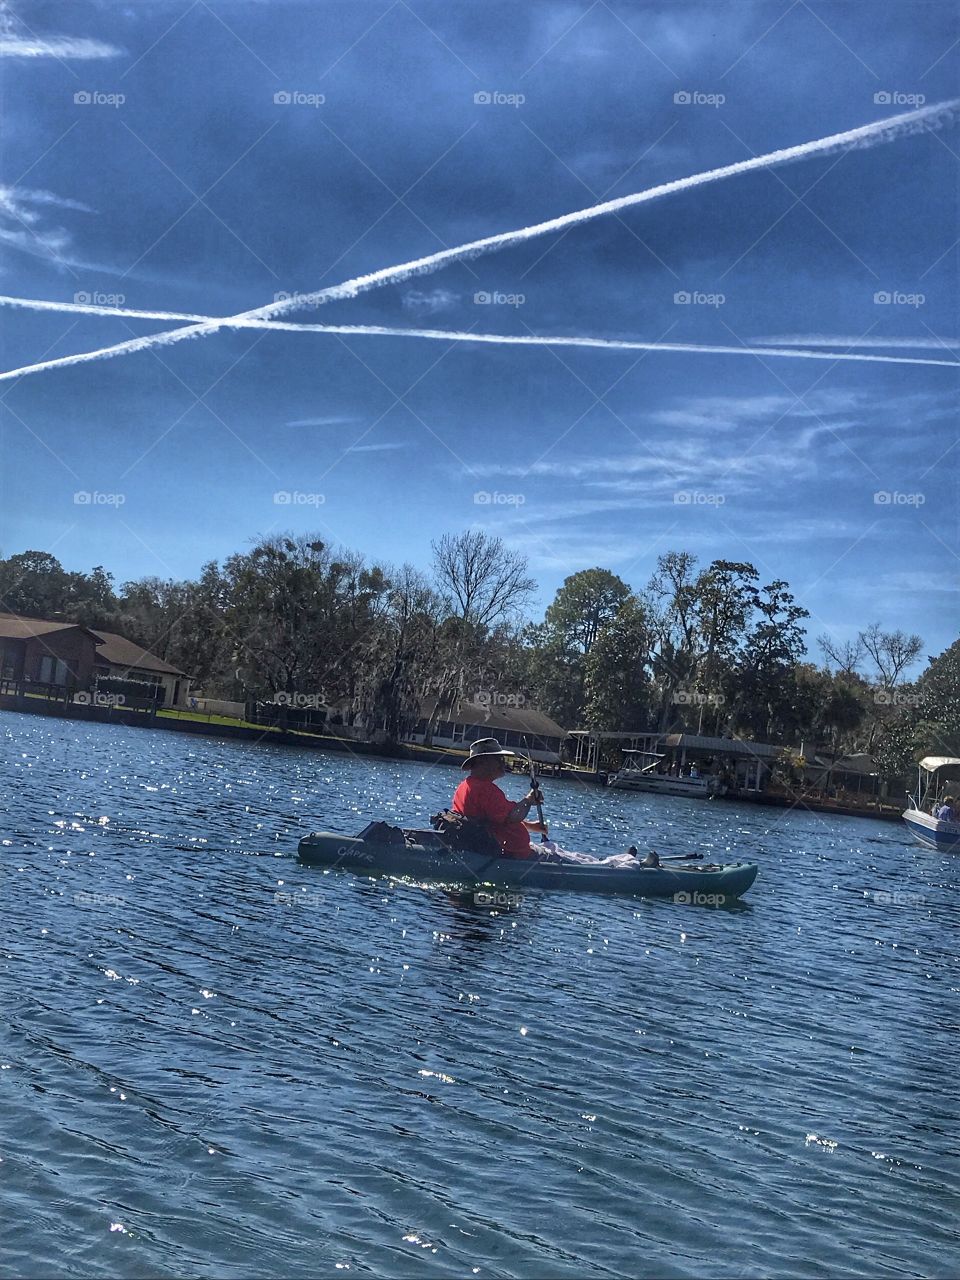 Kayaking in the river under the sun and the “X”